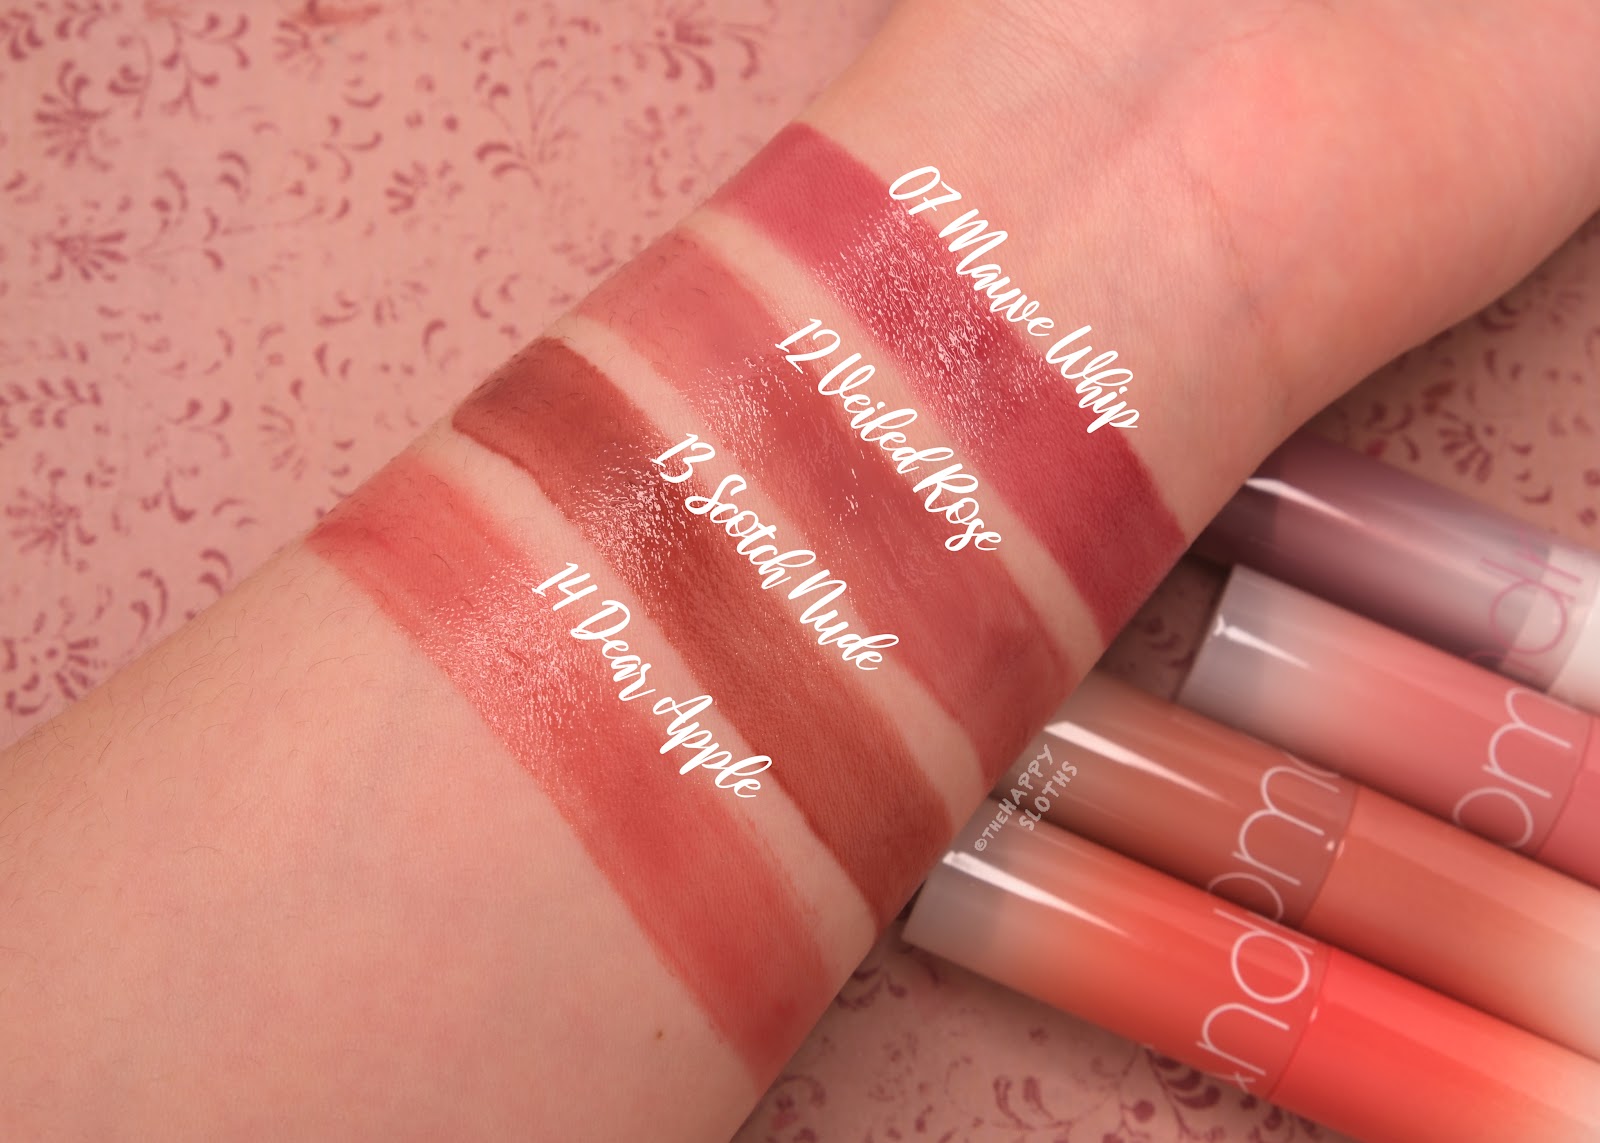 Romand | Glasting Melting Balm in "07 Mauve Whip", "12 Veiled Rose", "13 Scotch Nude" & "14 Dear Apple": Review and Swatches